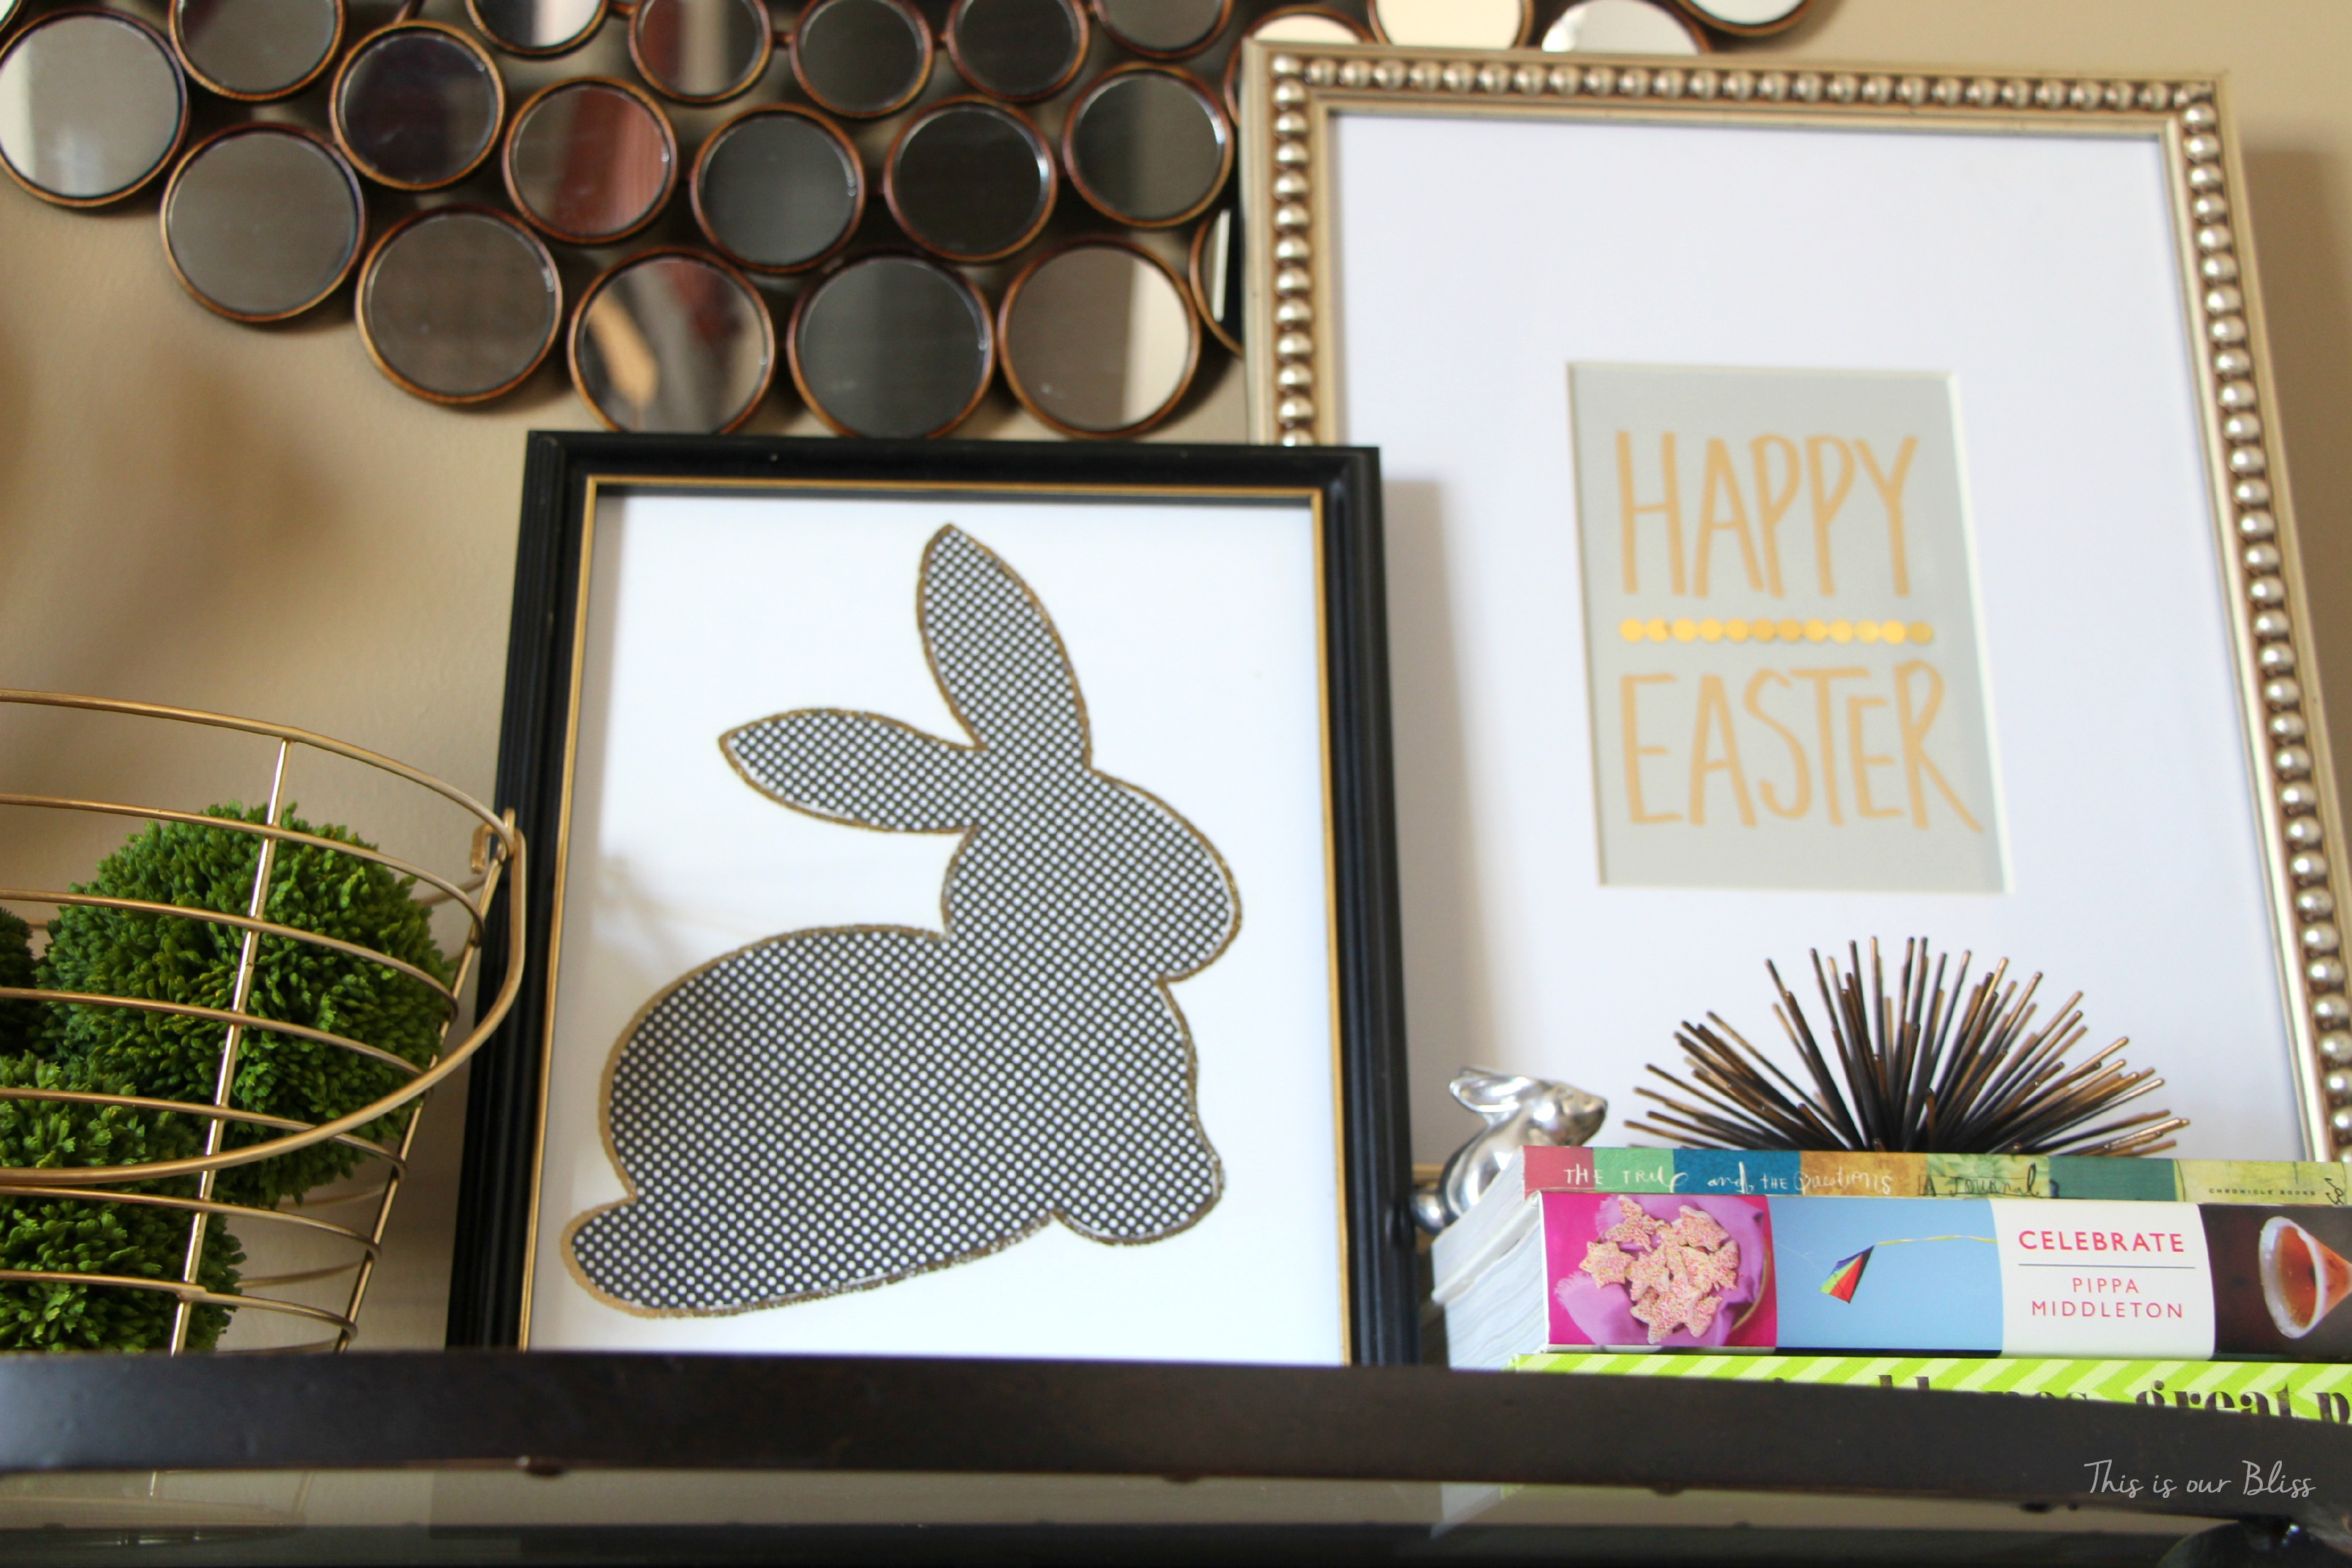 Bunny printable - trace onto paper - cut out to use as a stencil - Chic Easter art - black white and gold - This is our Bliss 10